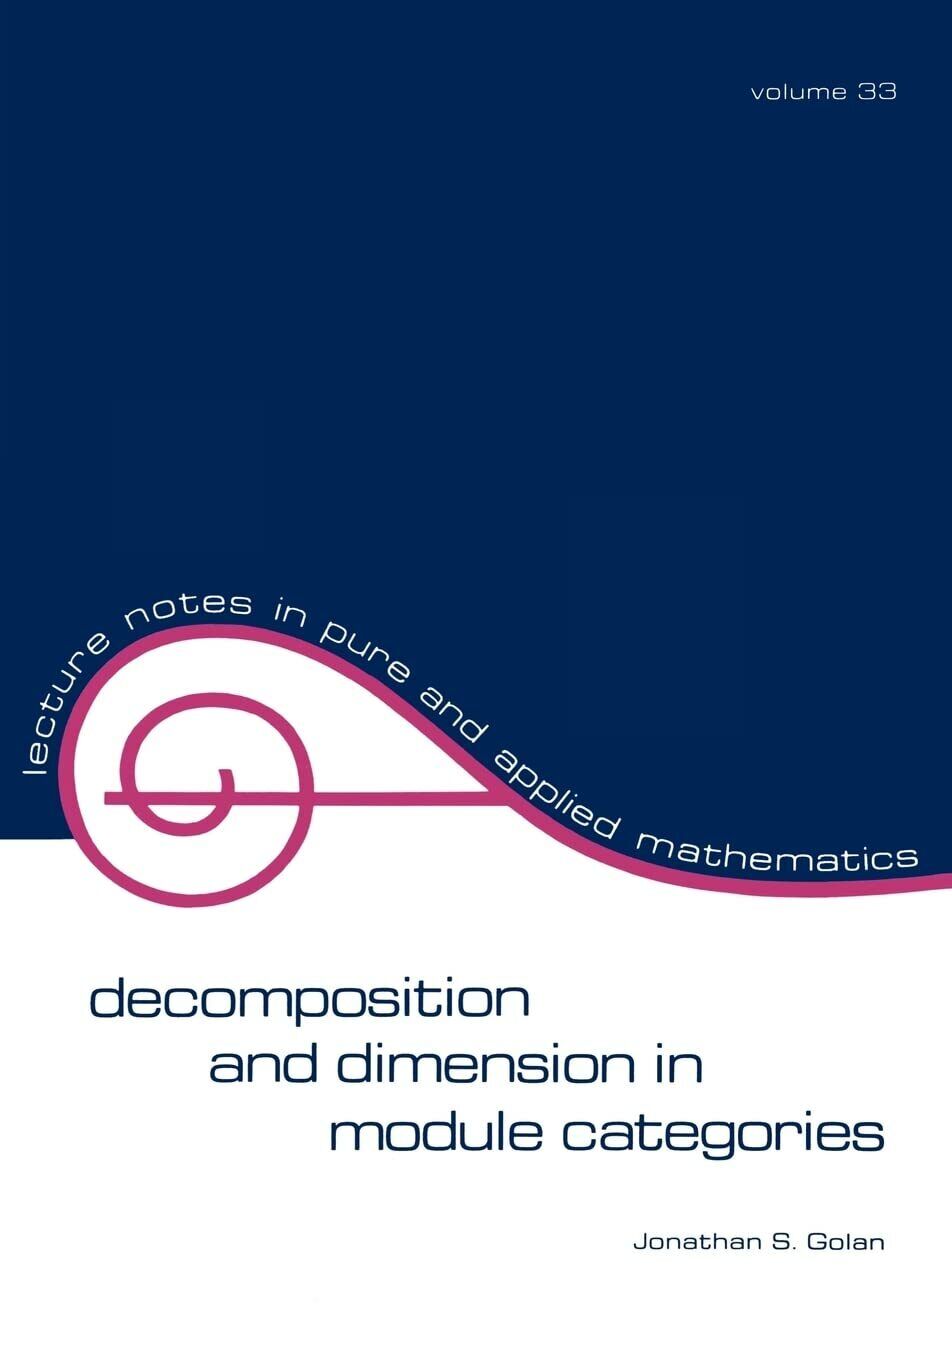 Decomposition and Dimension in Module Categories - Jonathan S. Golan - 1977